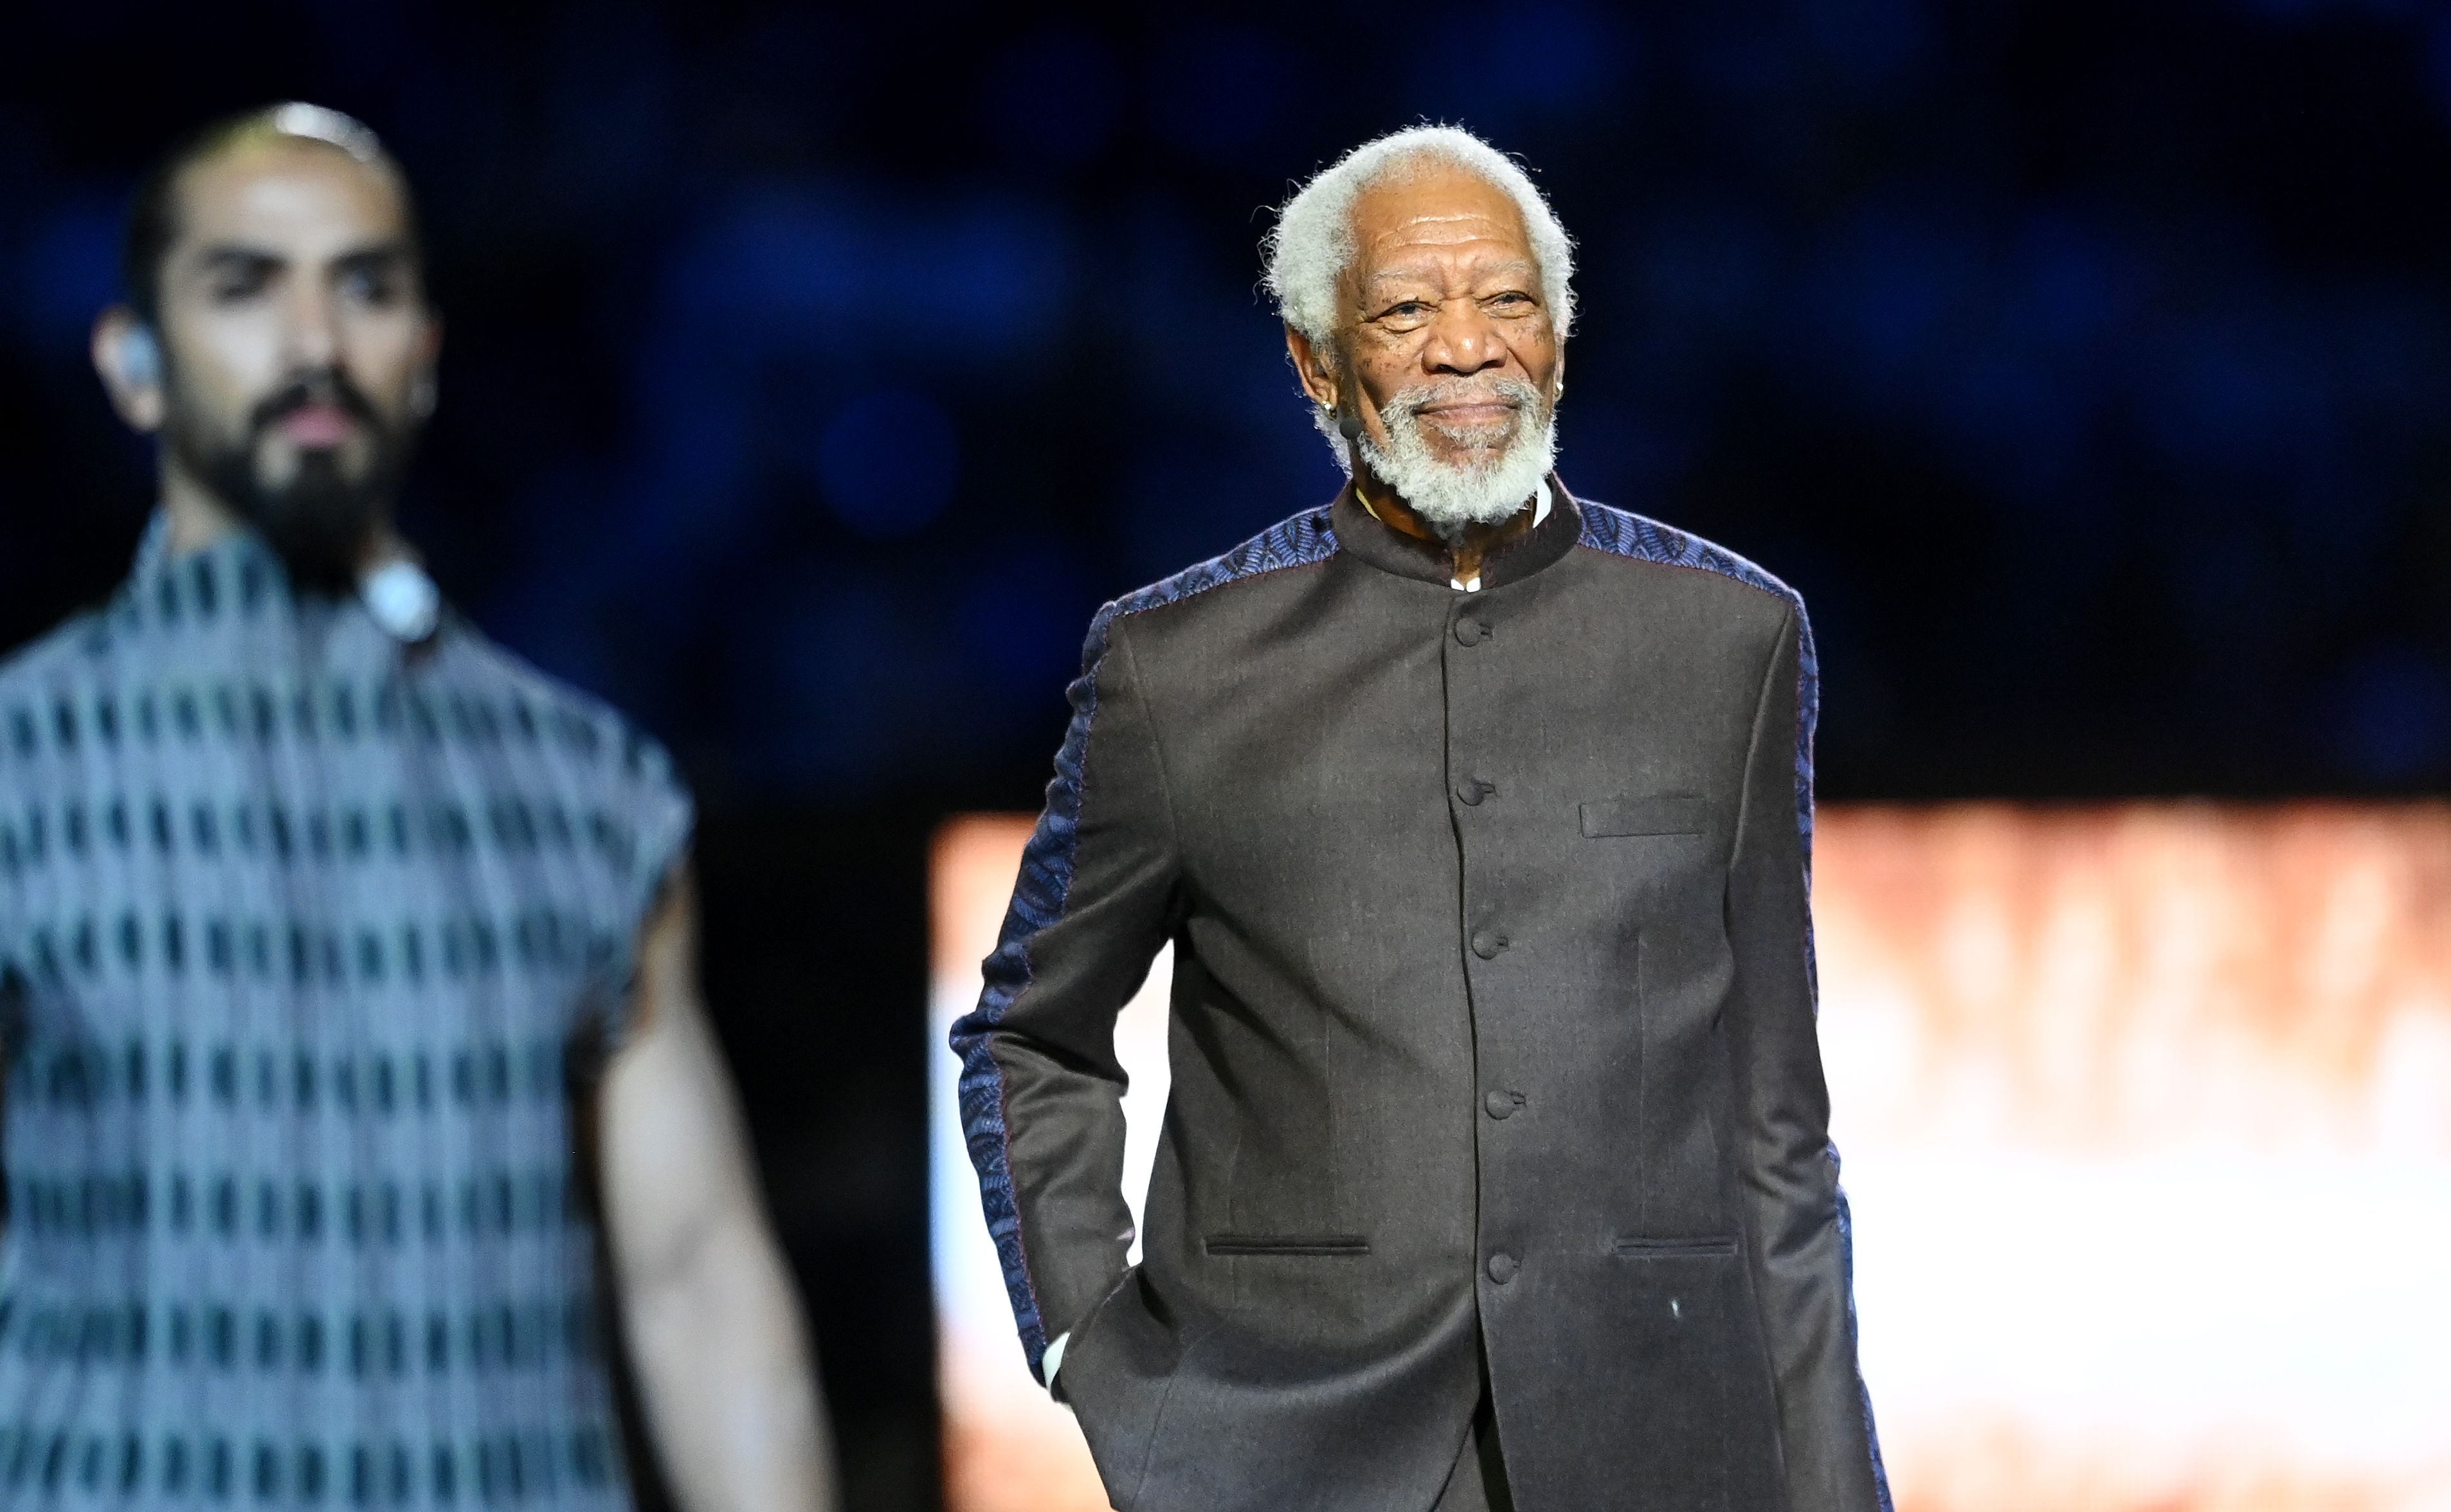 Morgan Freeman performs during the opening ceremony at the FIFA World Cup Qatar